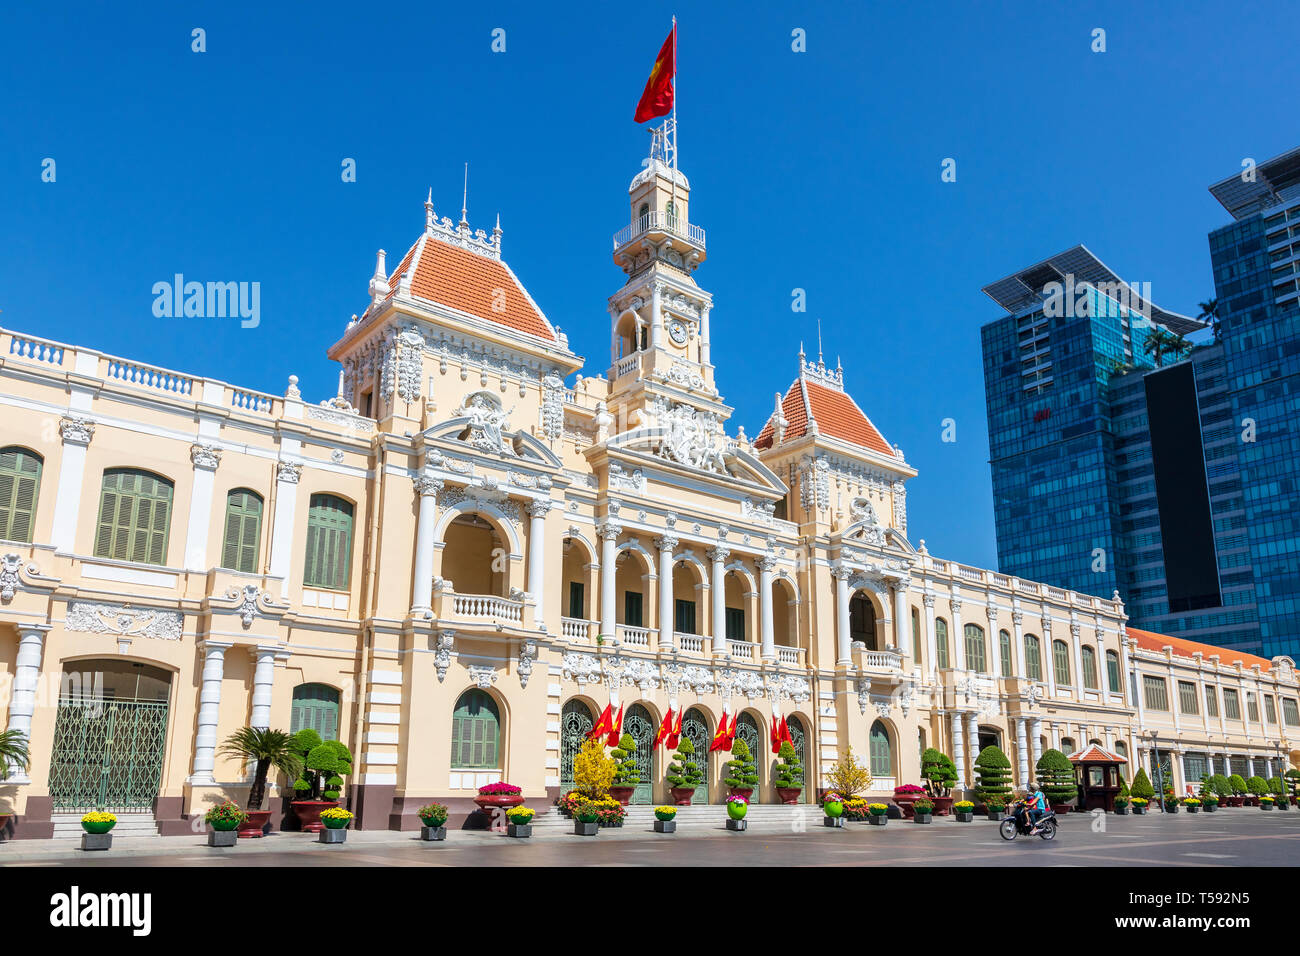 Hotel de Ville, (1901 - 1908) a neo-baroque french architecture building at the northern end of Nguyen Hue Boulevard Ho Chi Minh City, Vietnam Stock Photo